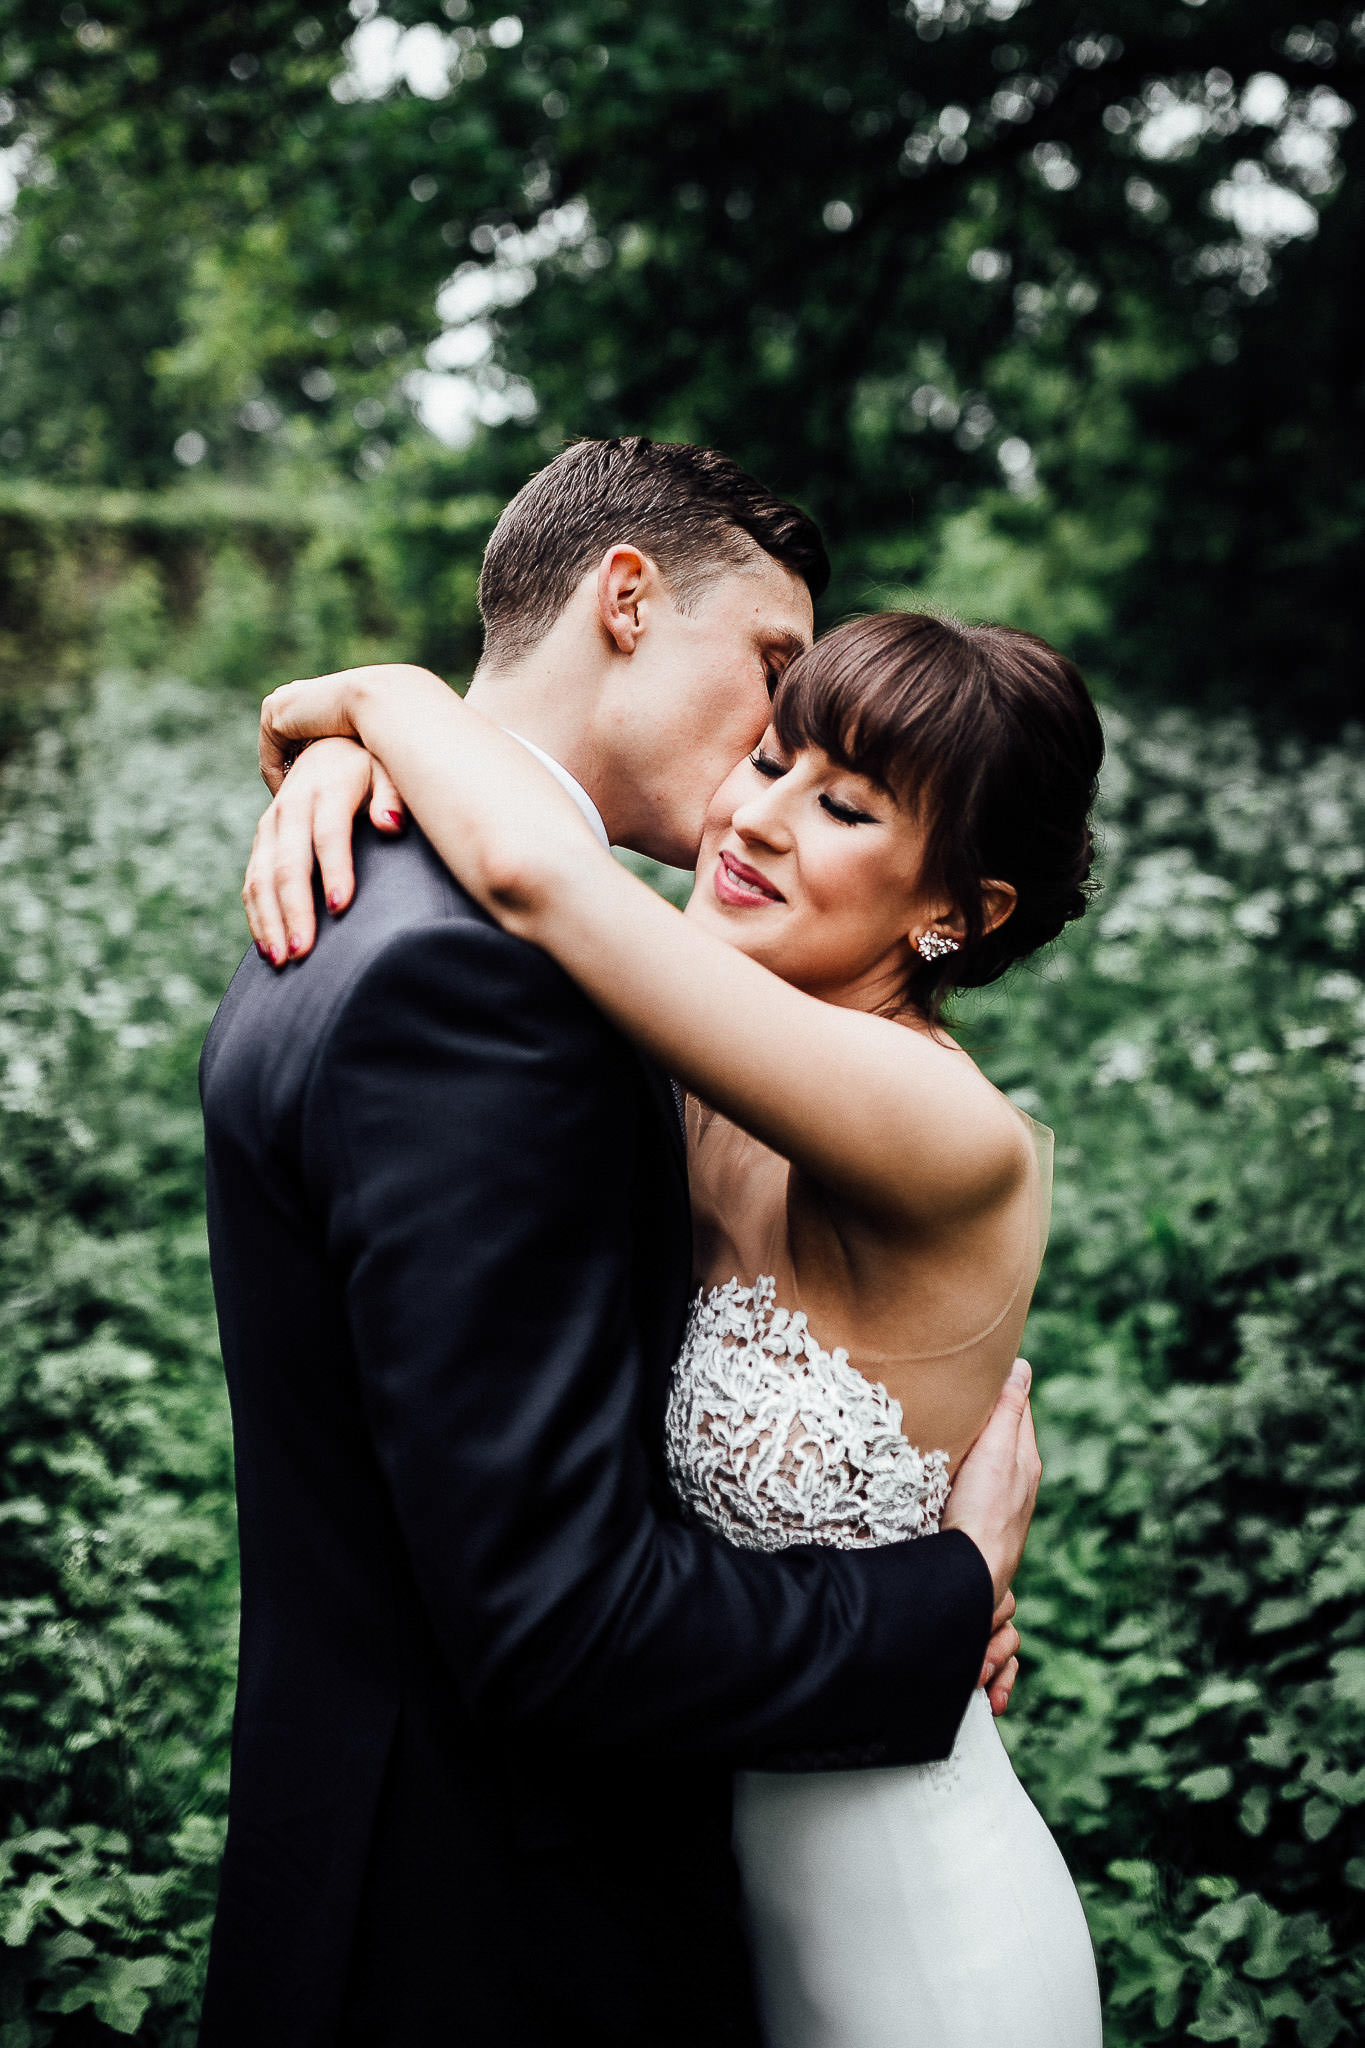 couples portraits from wedding at morden hall london